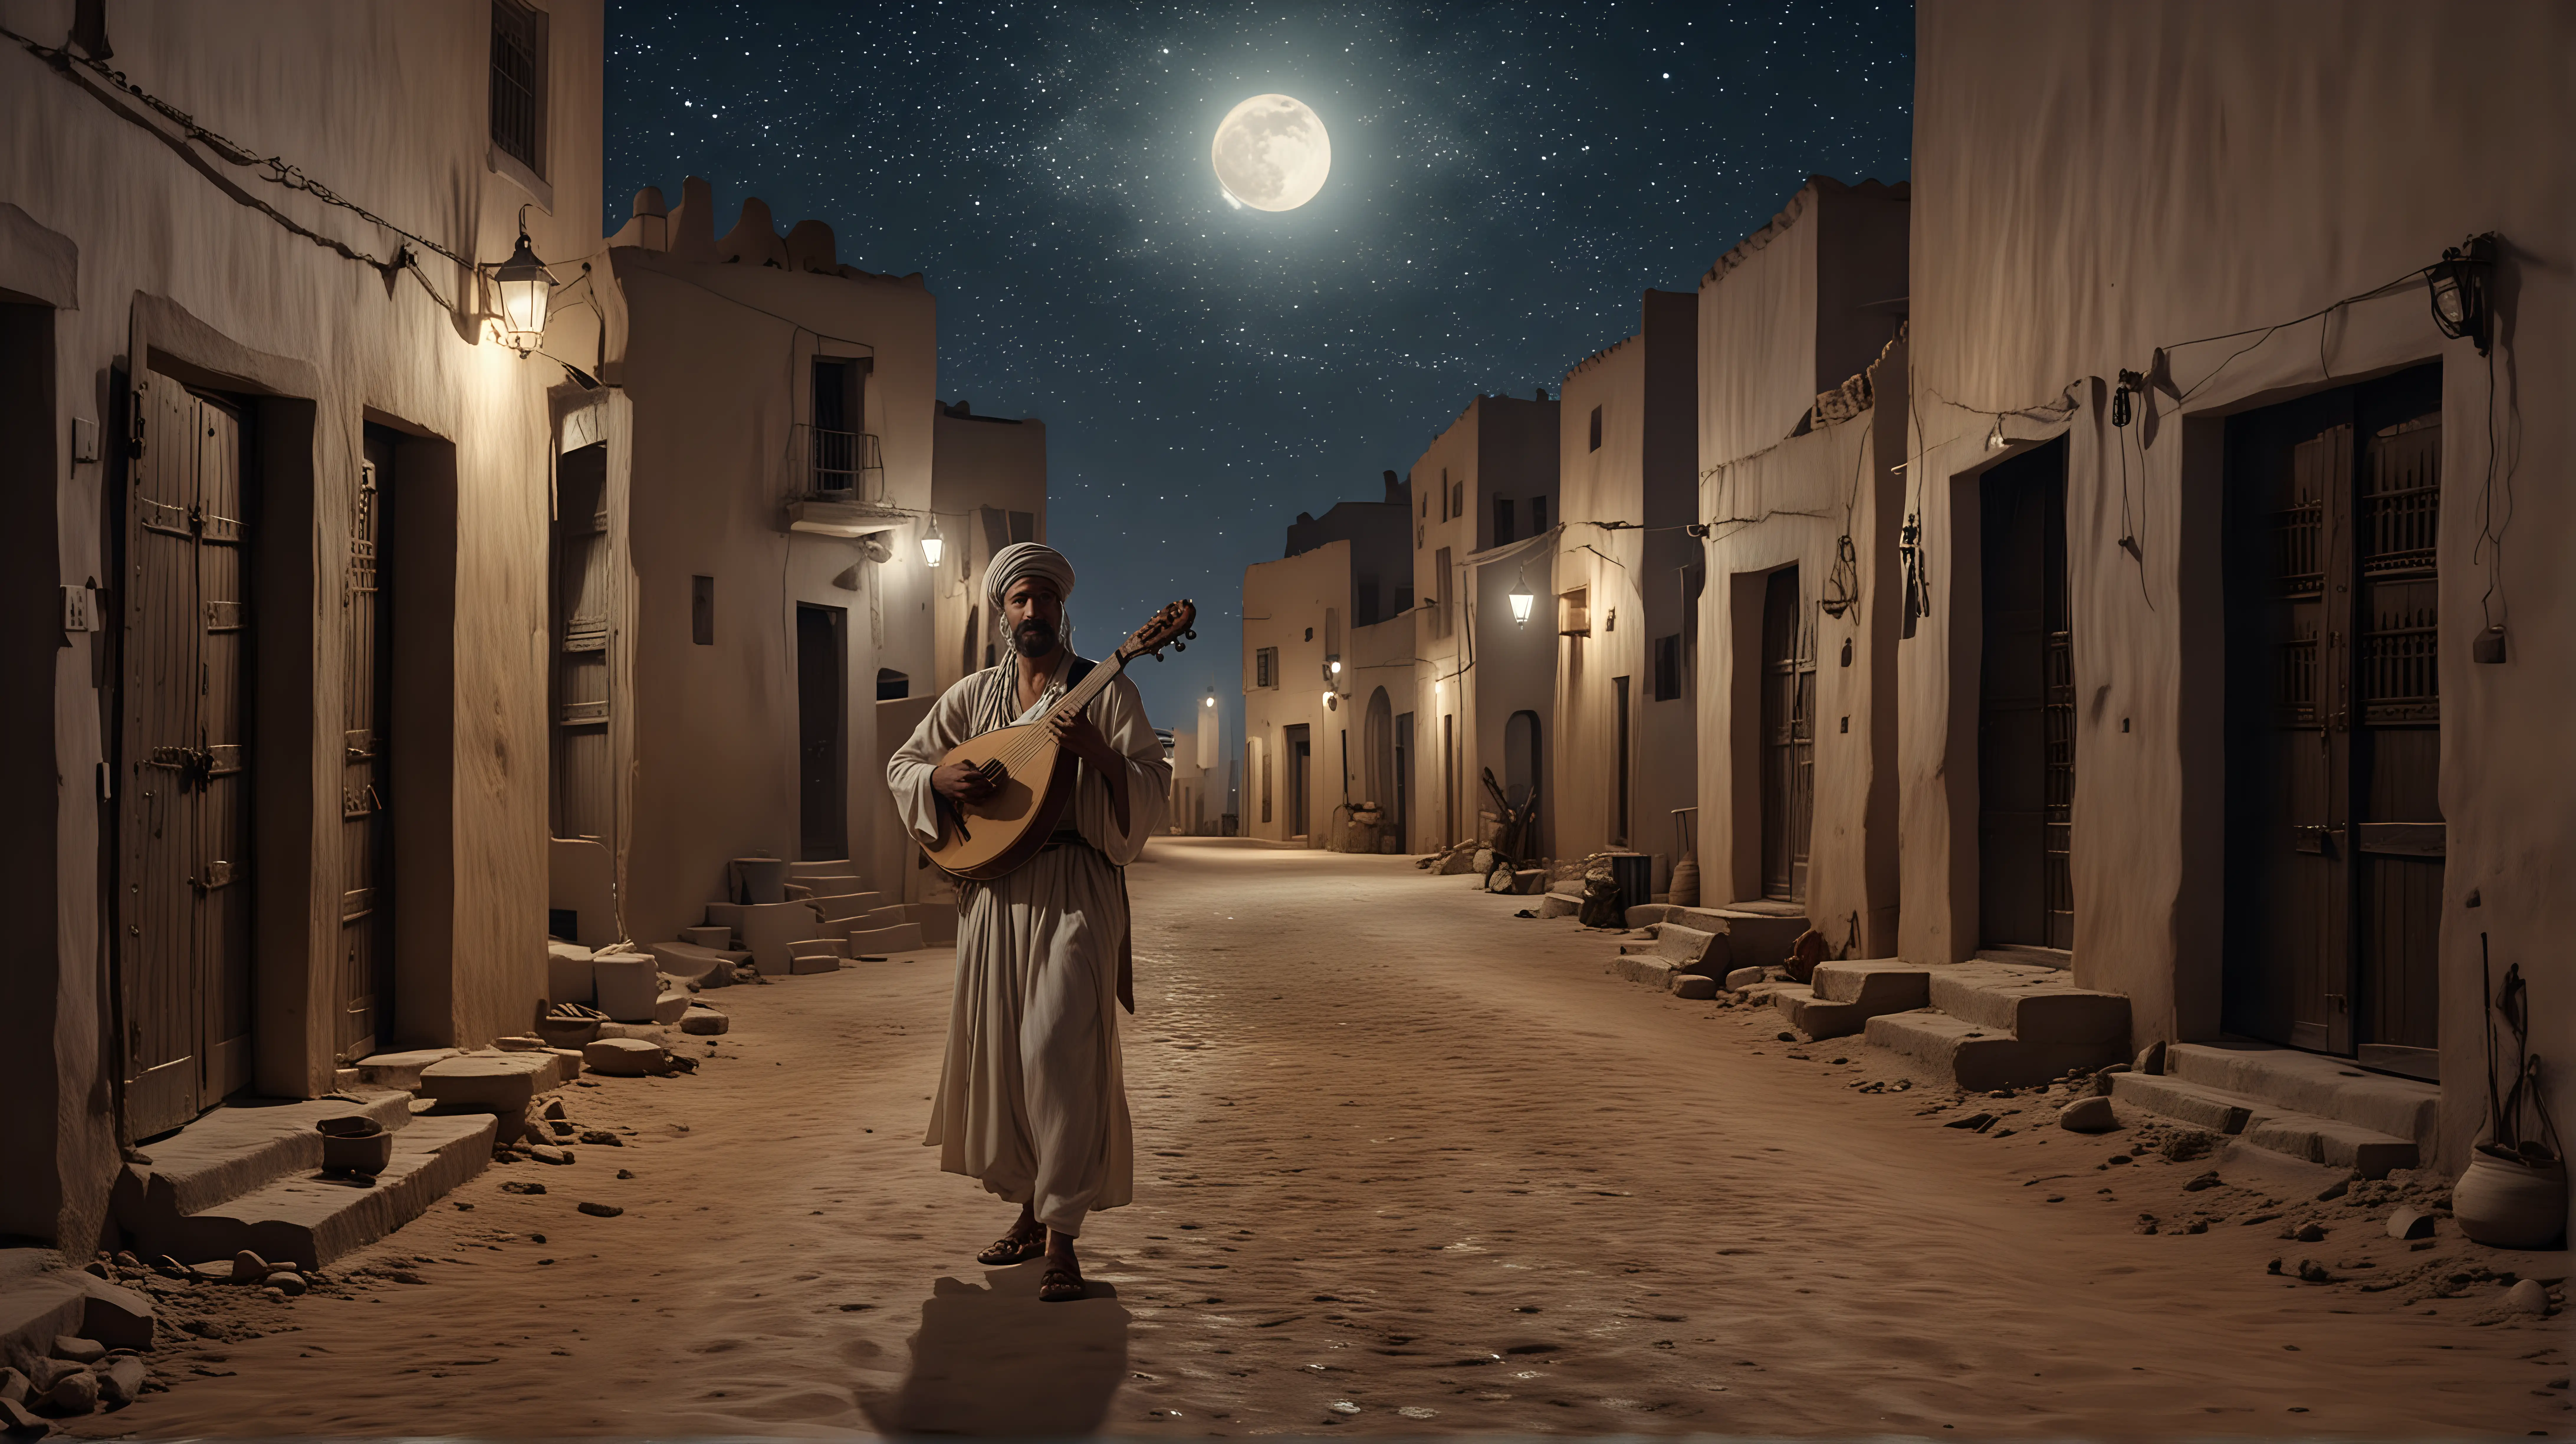 Itinerant Moroccan musician carring is arabian lute., wearing traditional clothes, arrives in his village at night, few houses with doors open, starry night, quarter of moon, very realistic, cinematic, Cecil B. de Mille Ten Commandment style